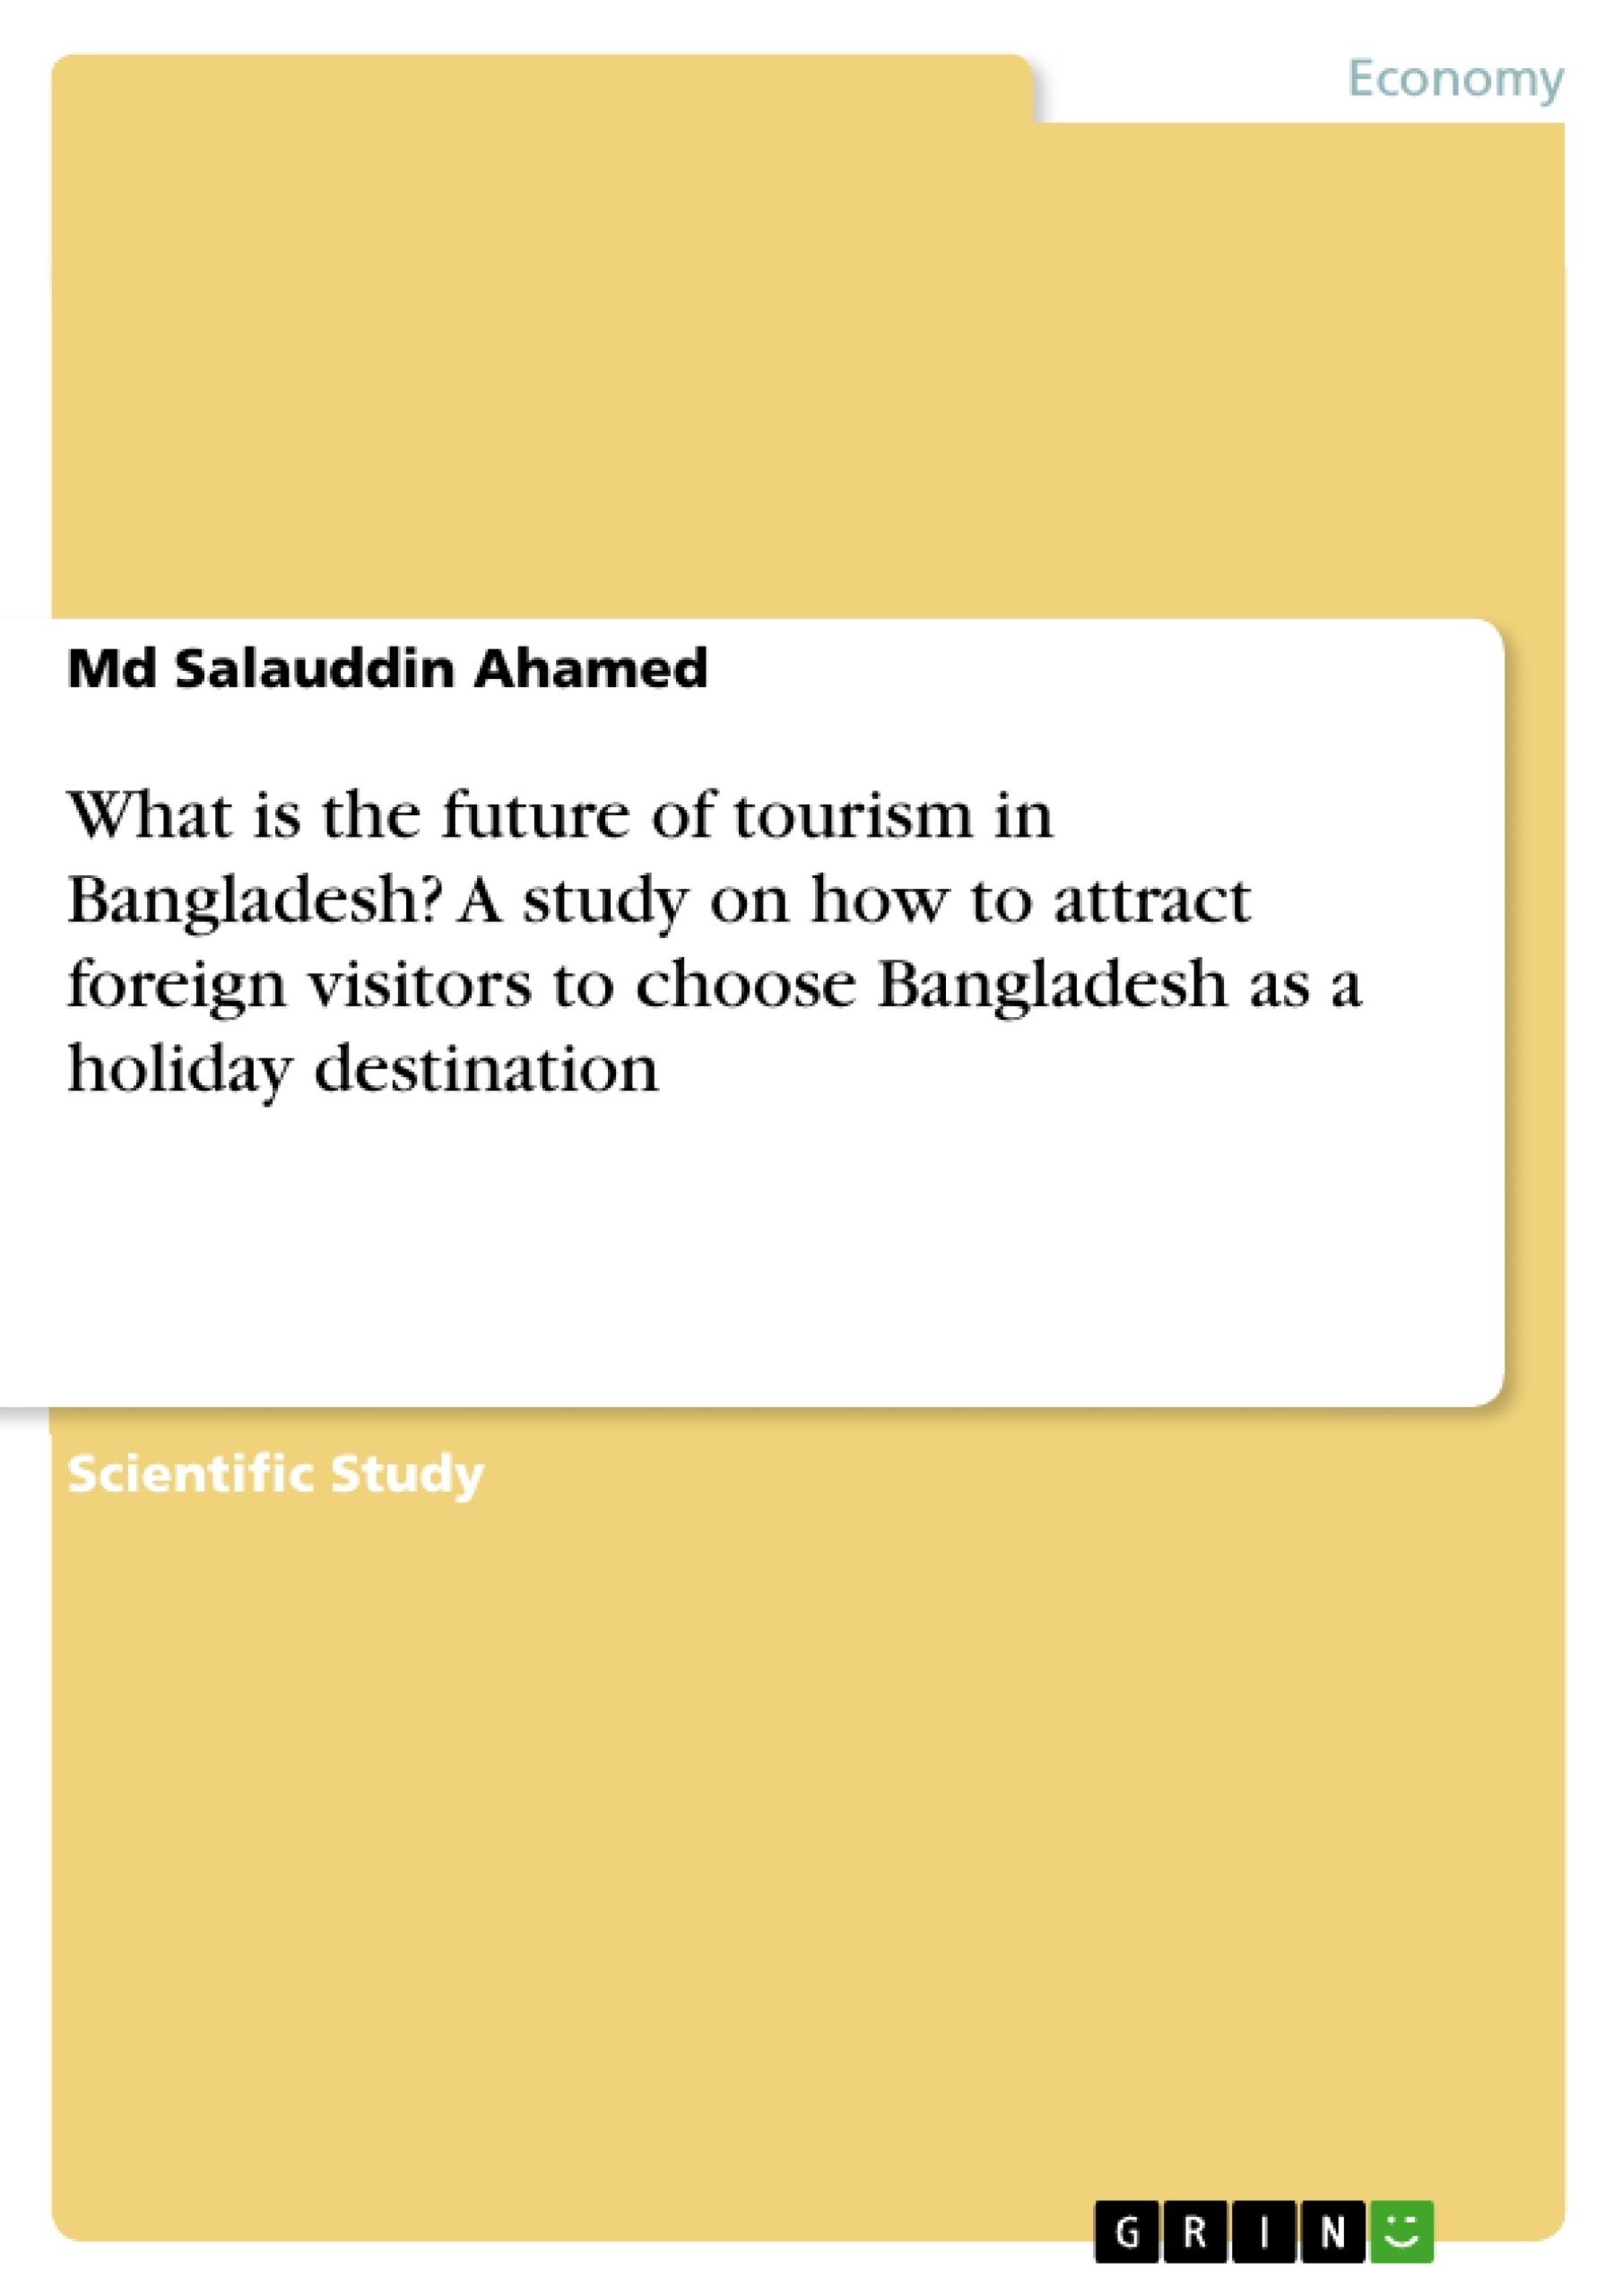 Titel: What is the future of tourism in Bangladesh? A study on how to attract foreign visitors to choose Bangladesh as a holiday destination